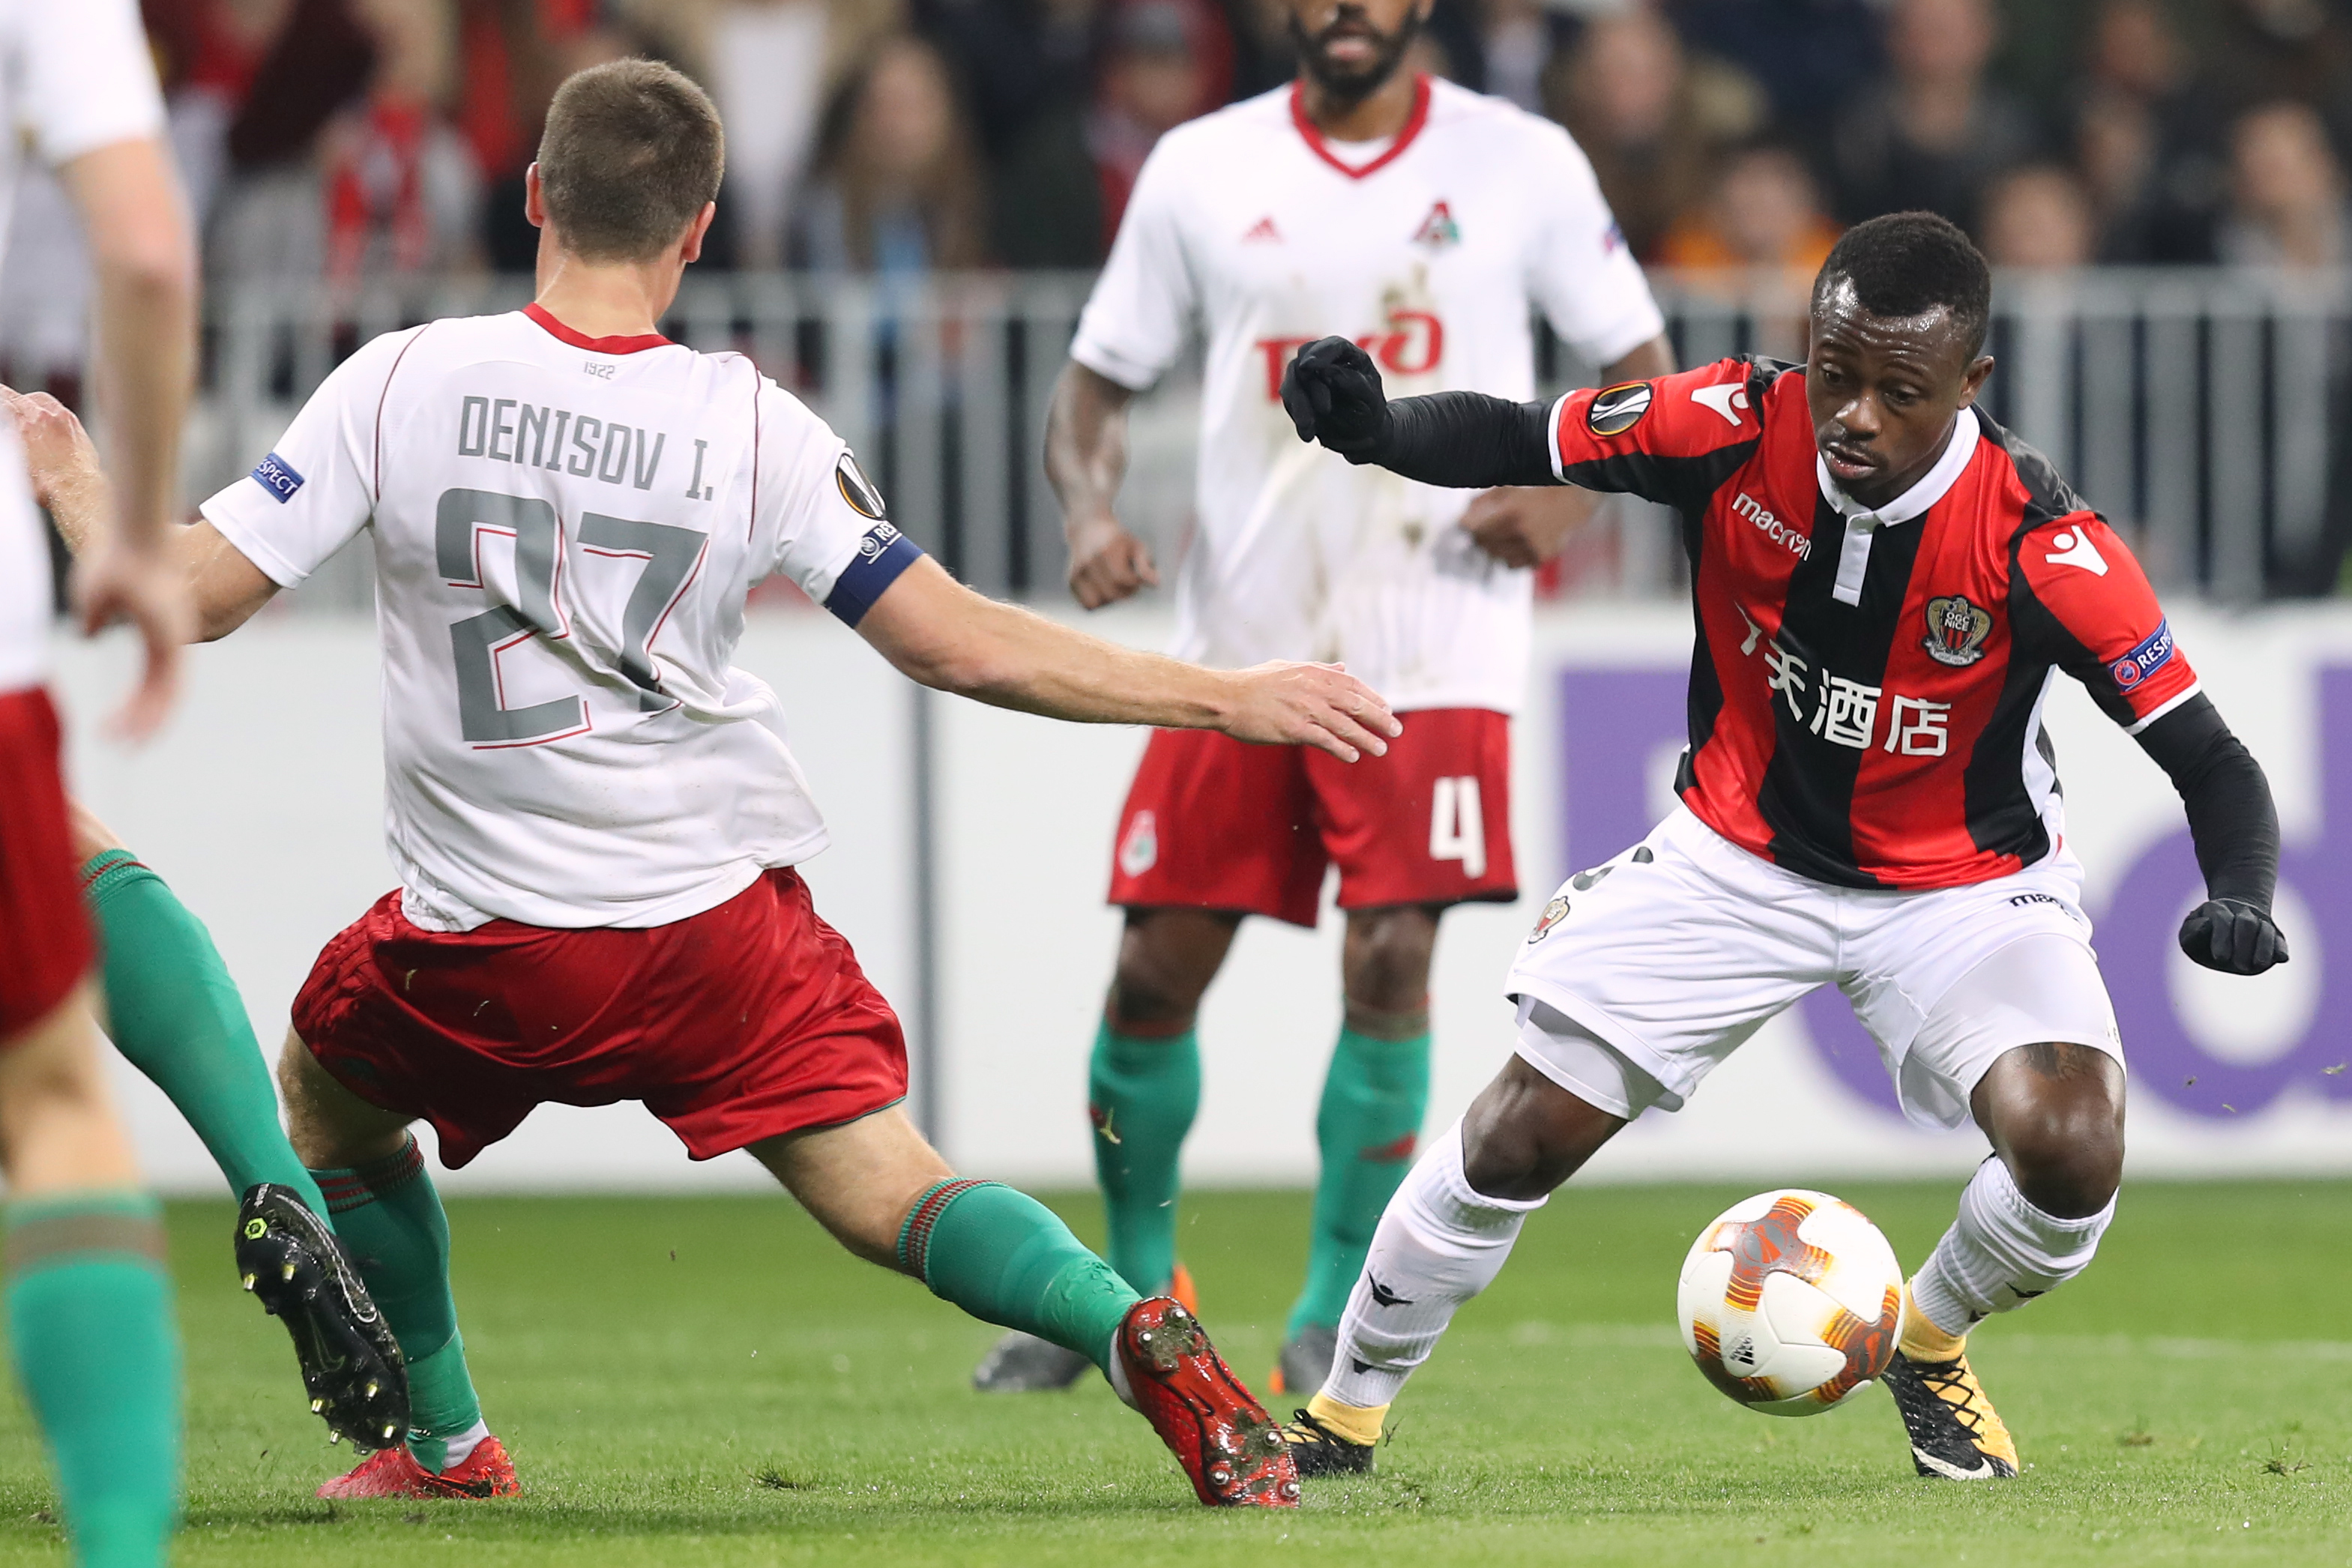 Nice's Ivorian midfielder Jean Michael Seri (R) vies with Lokomotiv Igor Denisov (L) during the UEFA Europa League football match between Nice and Lokomotiv Moscow on February 15, 2018, at the Allianz Riviera stadium in Nice, southeastern France.   / AFP PHOTO / VALERY HACHE        (Photo credit should read VALERY HACHE/AFP/Getty Images)